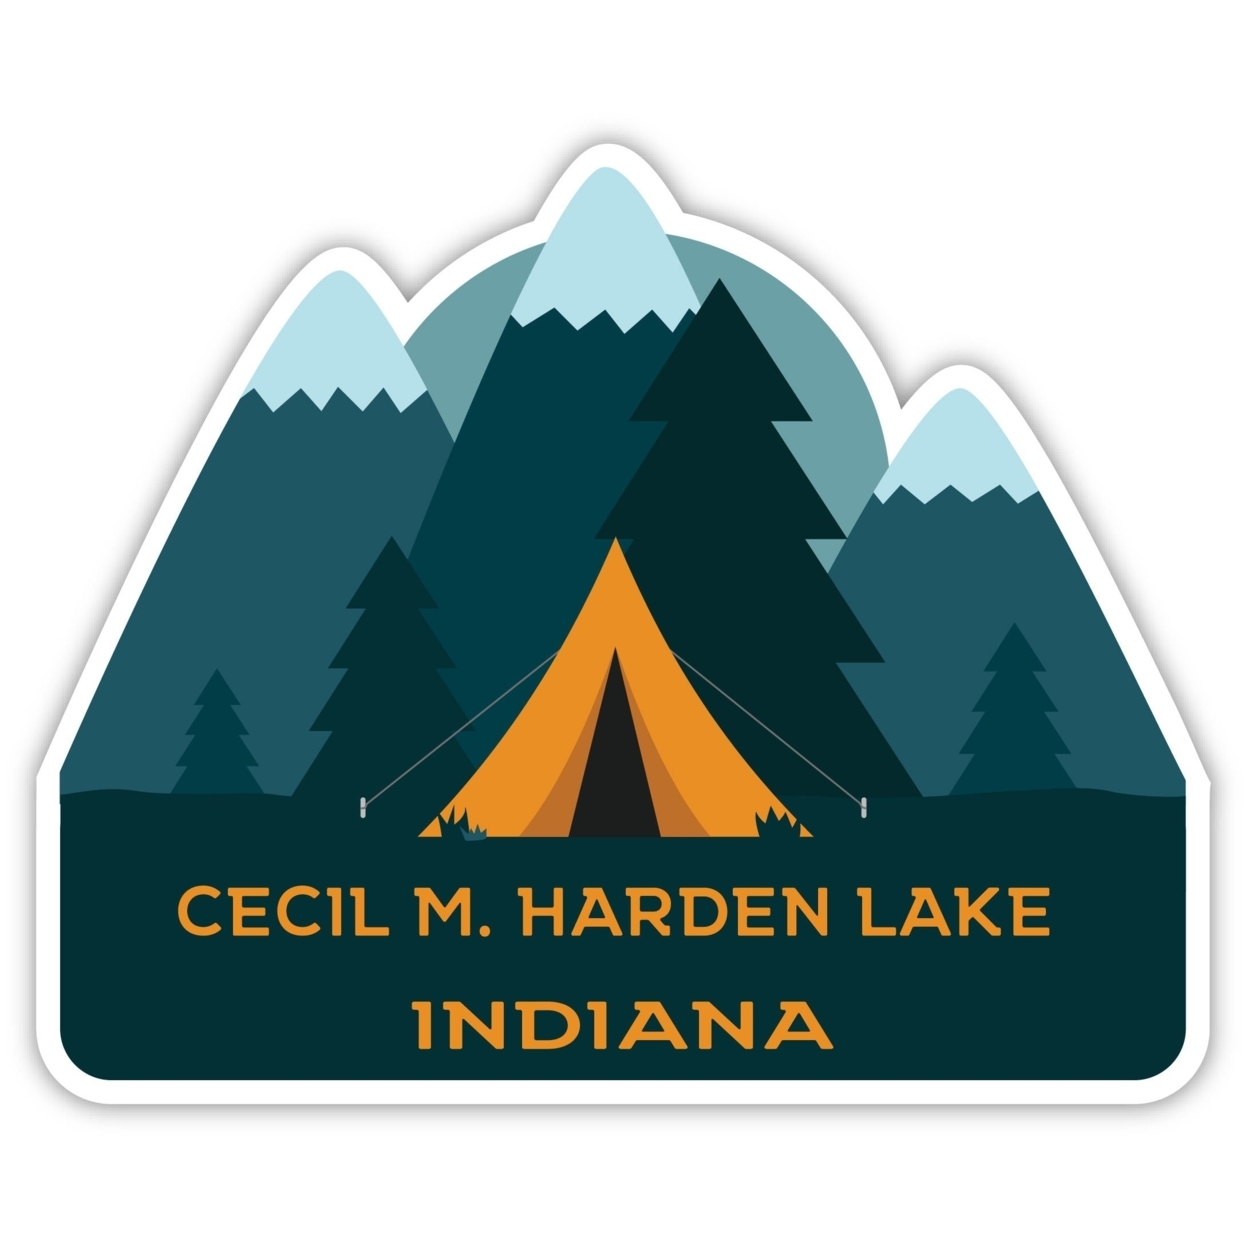 Cecil M. Harden Lake Indiana Souvenir Decorative Stickers (Choose Theme And Size) - 4-Pack, 8-Inch, Tent